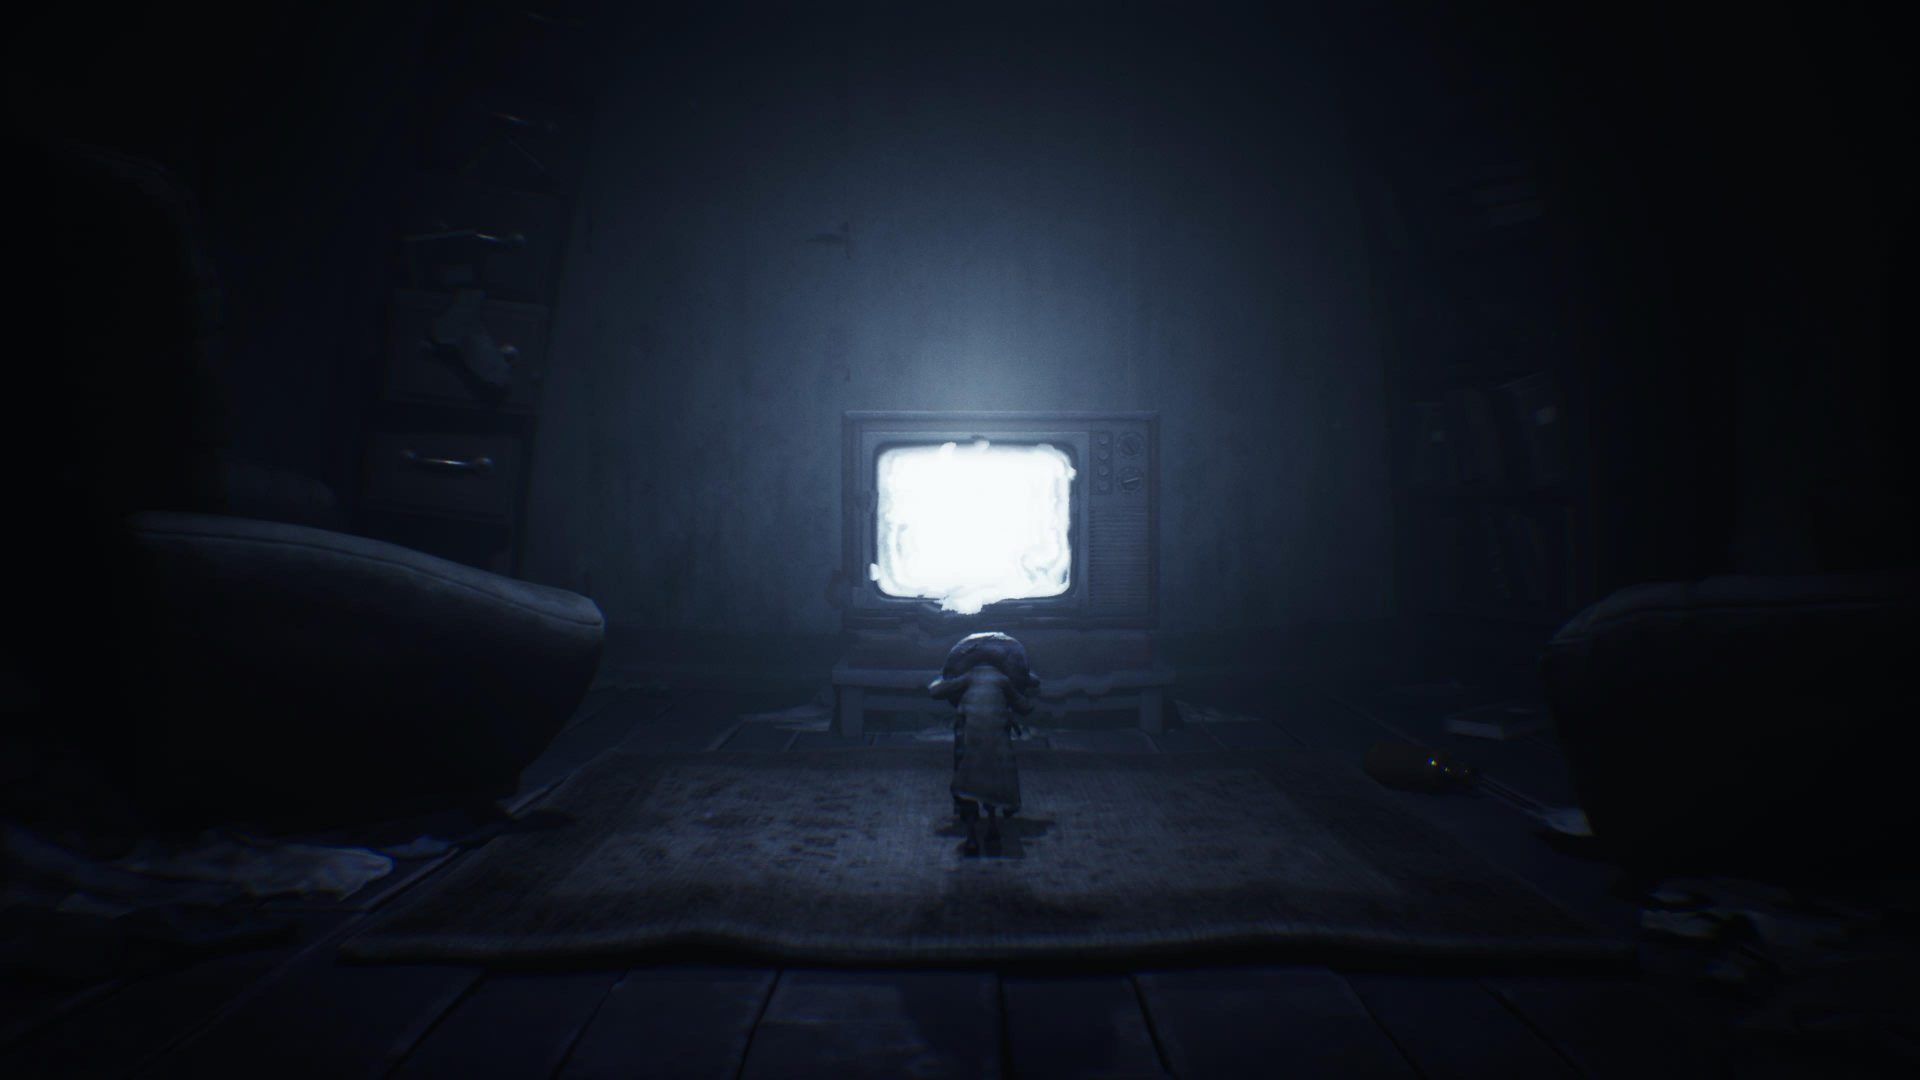 Little Nightmares 2 review: A horrifying sequel that sometimes